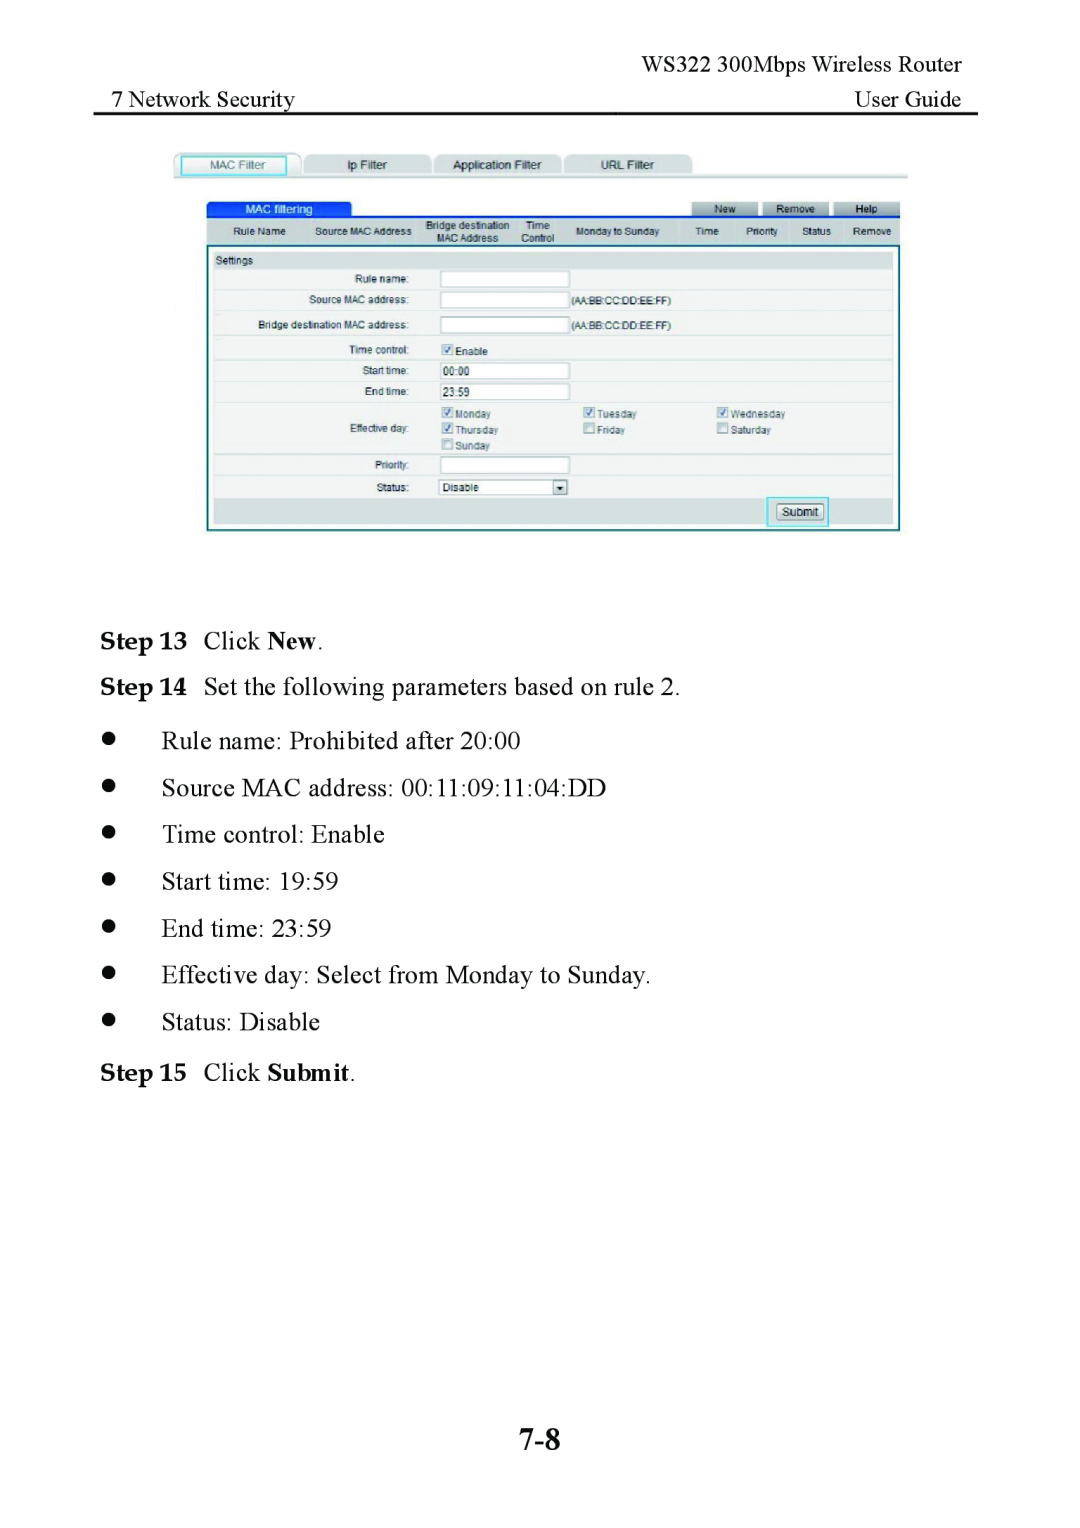 Huawei manual Click New, Click Submit, Network Security, User Guide, WS322 300Mbps Wireless Router 